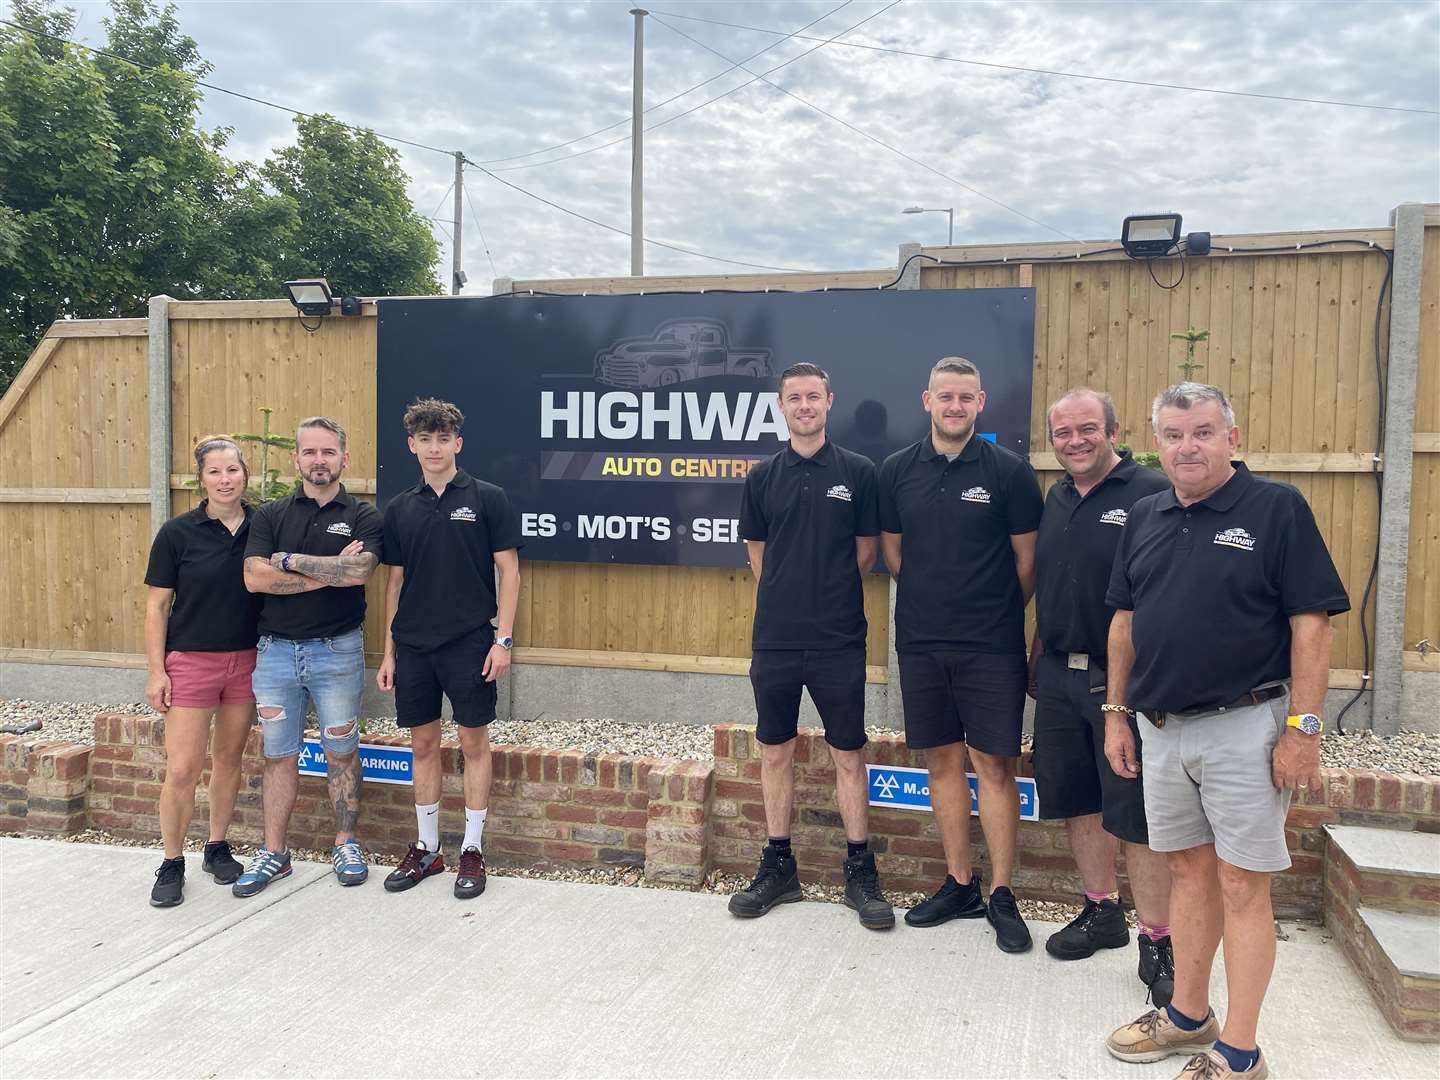 Left to right: Co owners Michelle and Jamie Luck, apprentice Shane Luck, manager Mark Percival, MOT testers Callum Major and Richard Buckler, and former owner David Luck